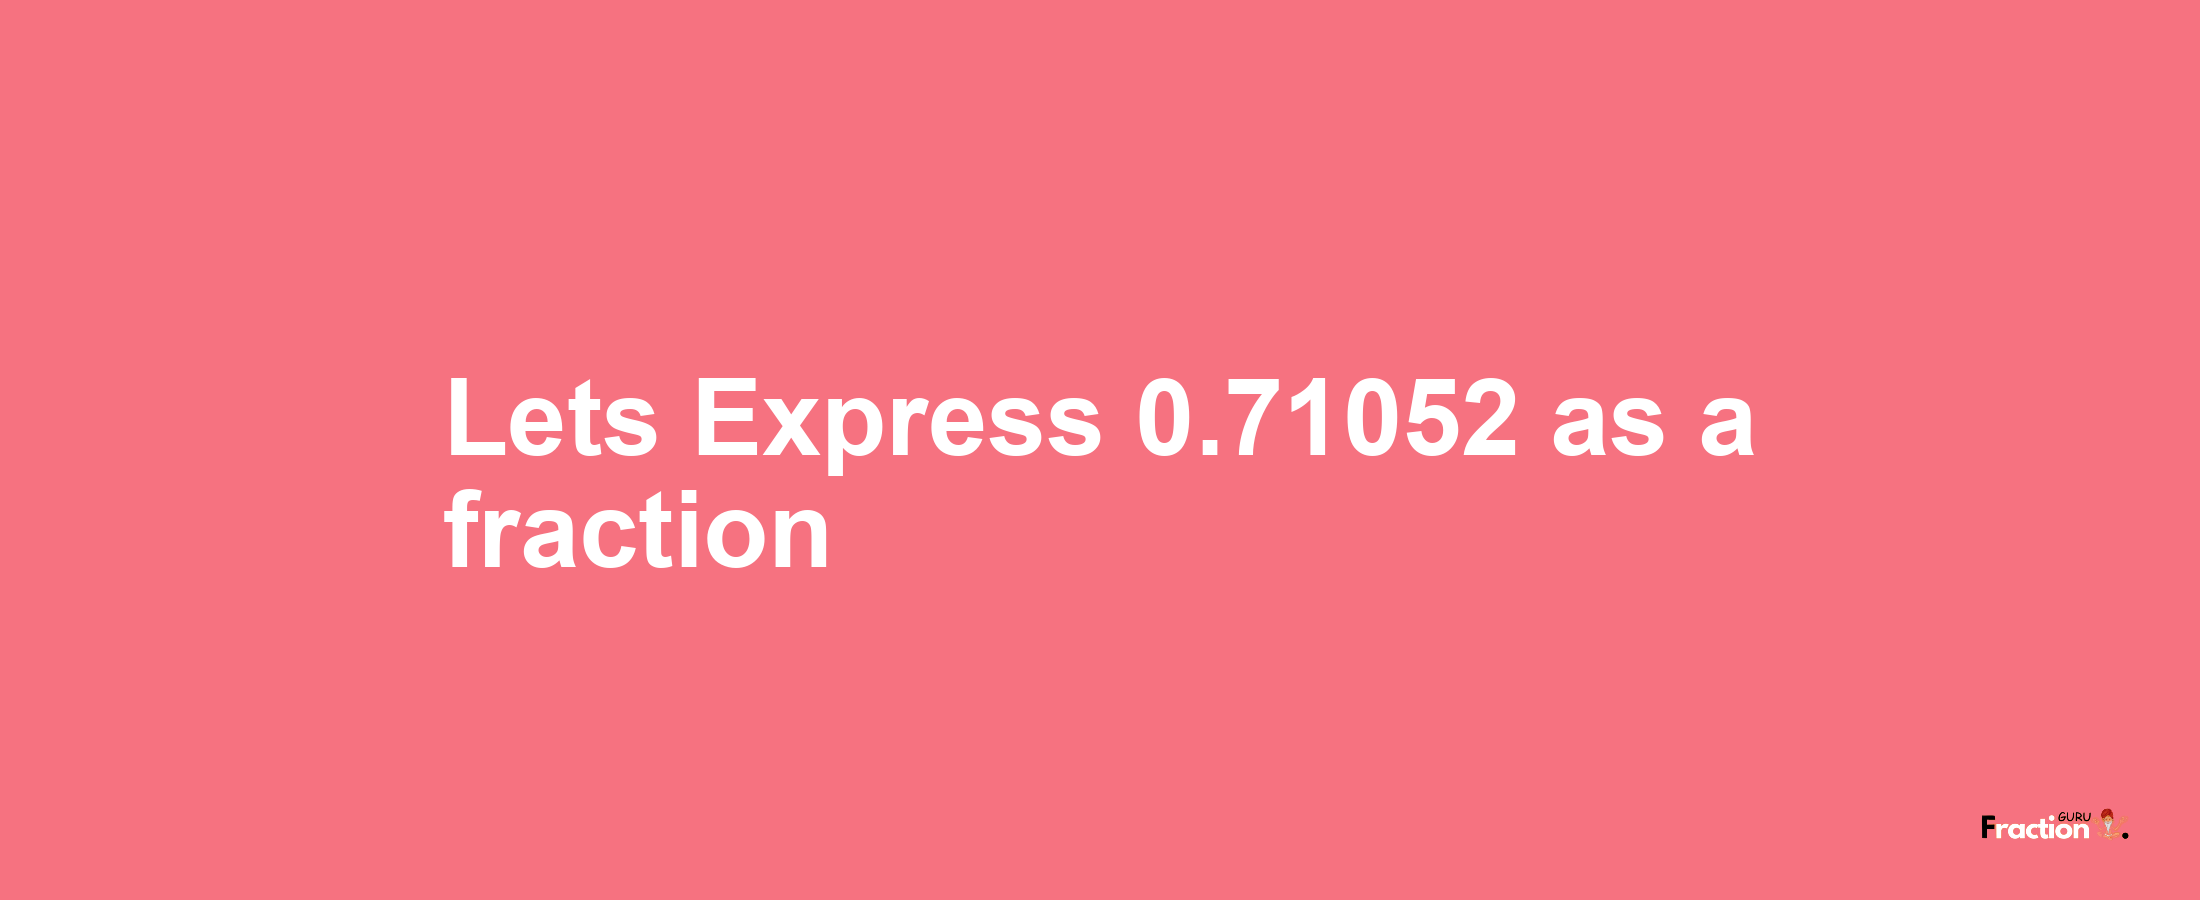 Lets Express 0.71052 as afraction